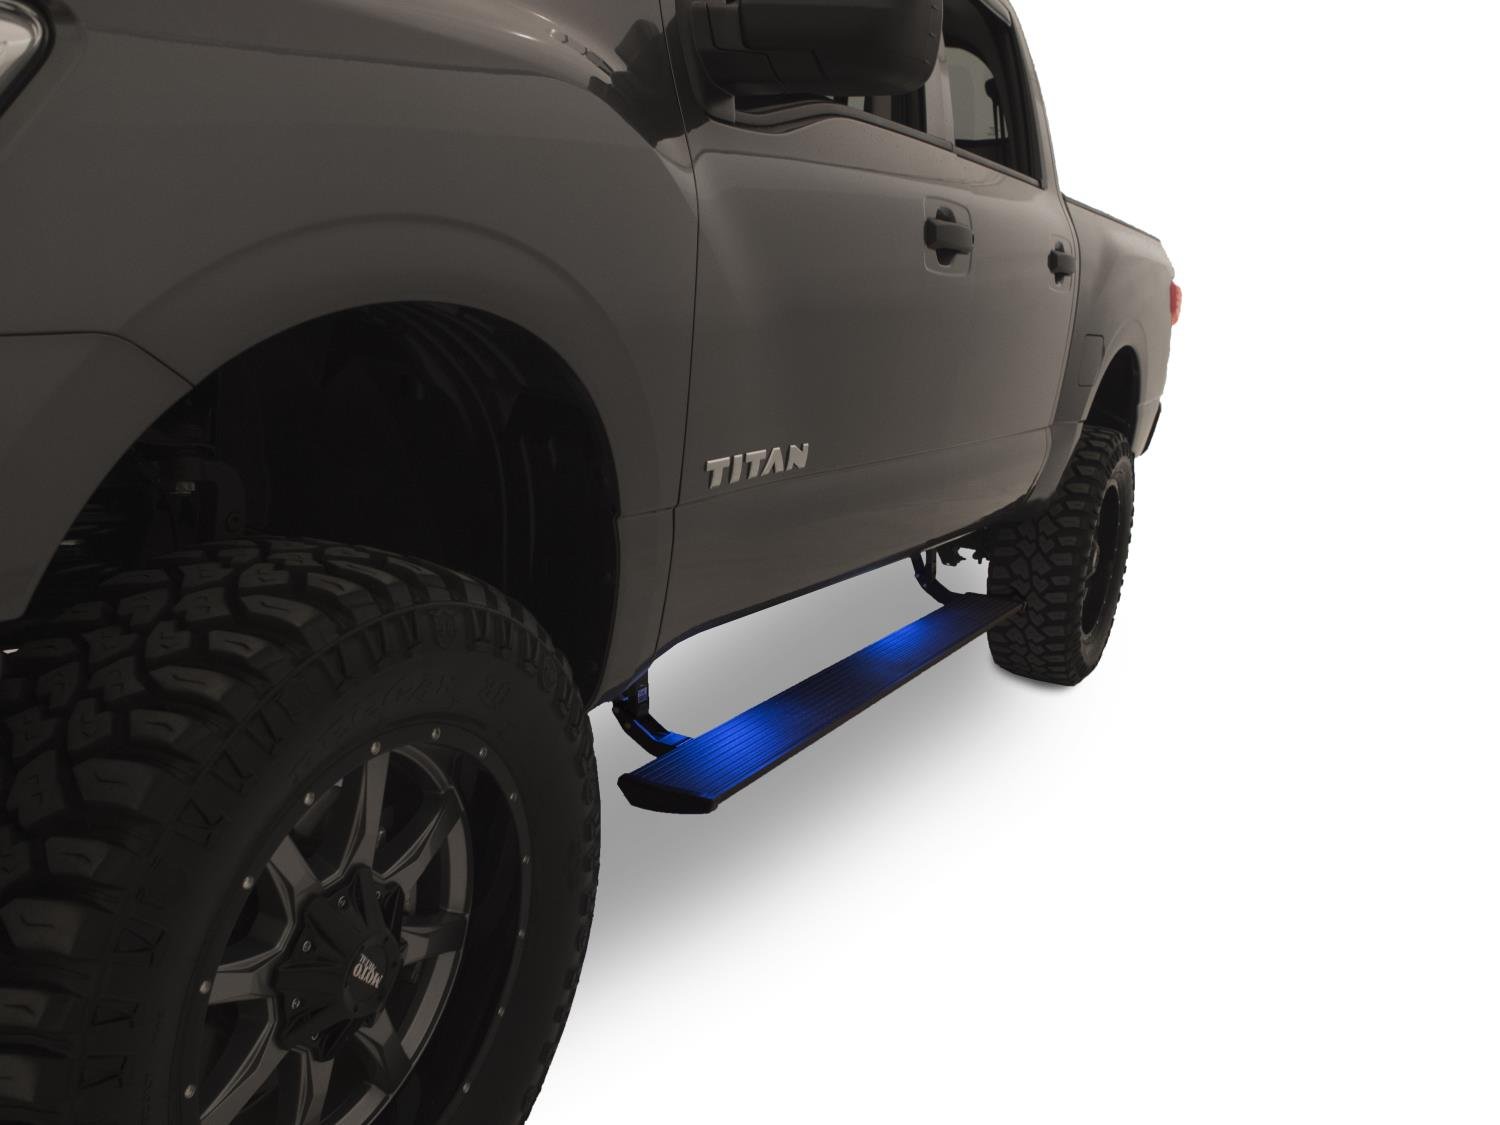 76120-01A PowerStep Automatic Running Boards, Fits 2016-2017 Nissan Titan/Titan XD, All Cabs